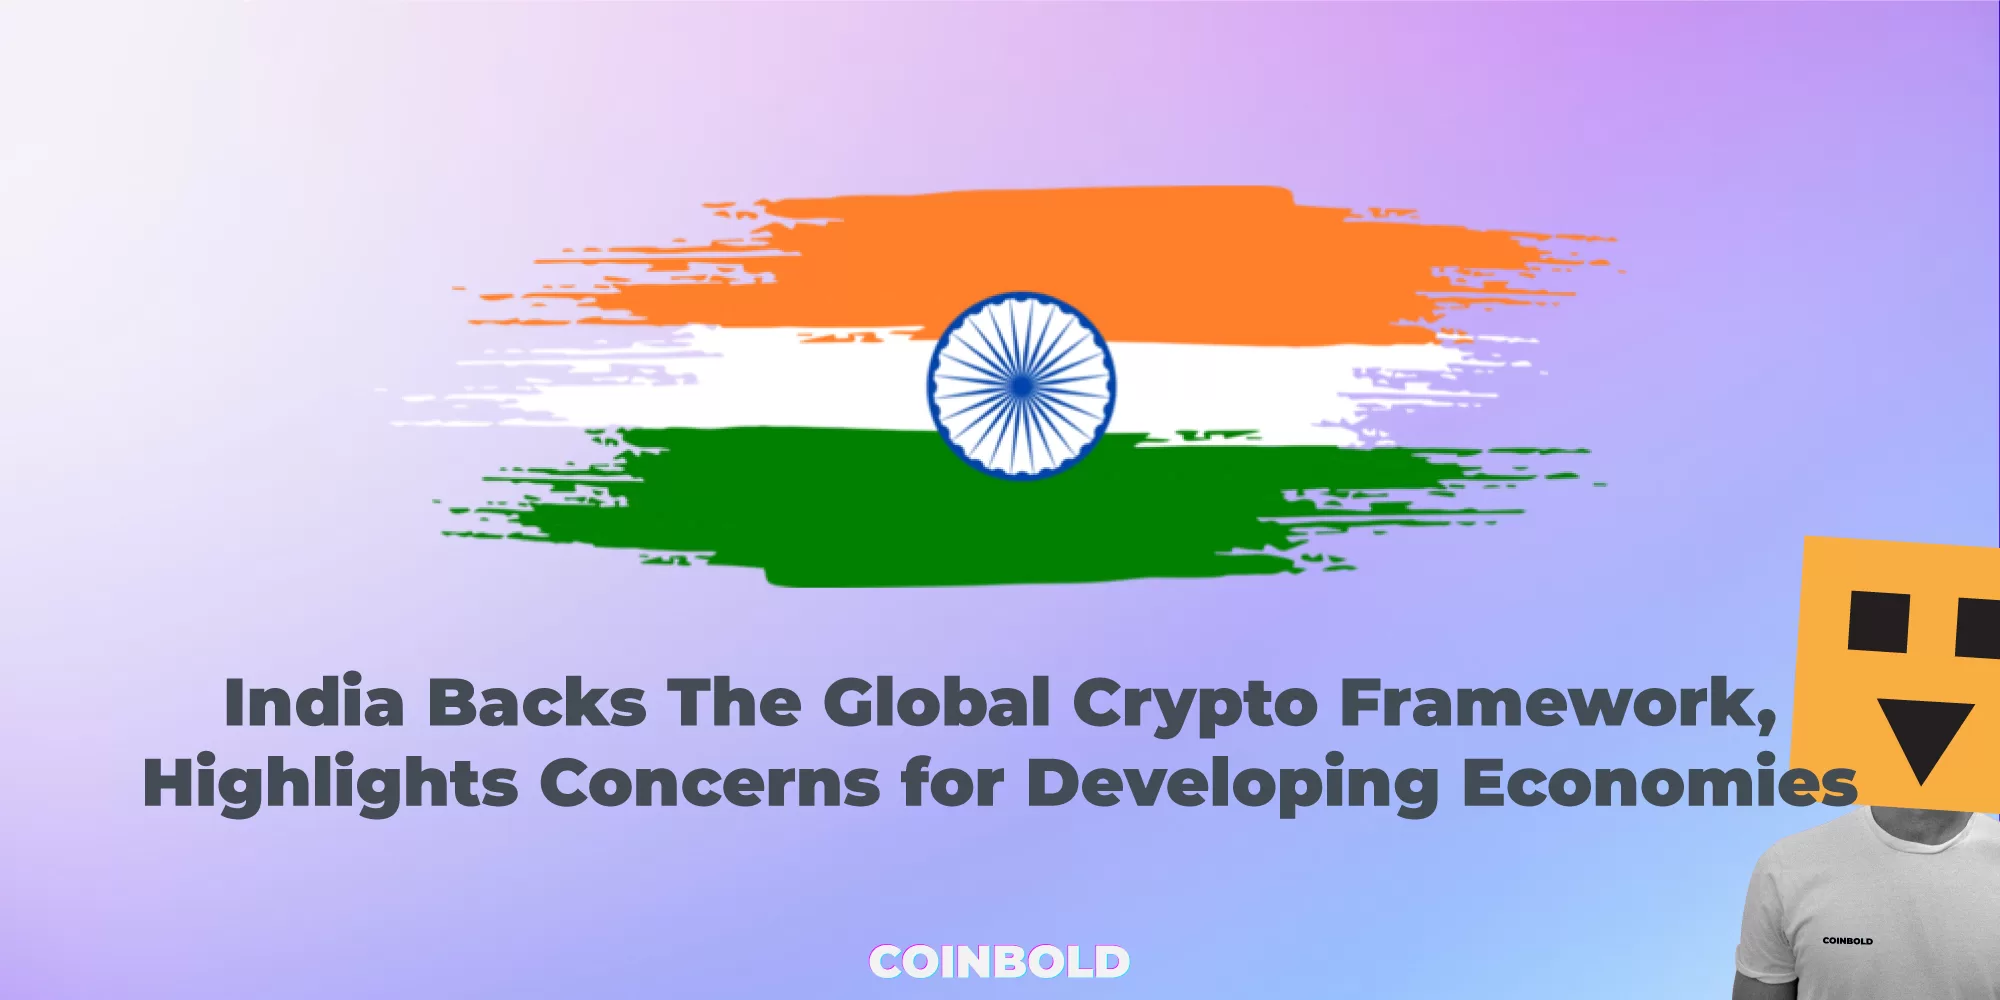 India Backs The Global Crypto Framework, Highlights Concerns for Developing Economies